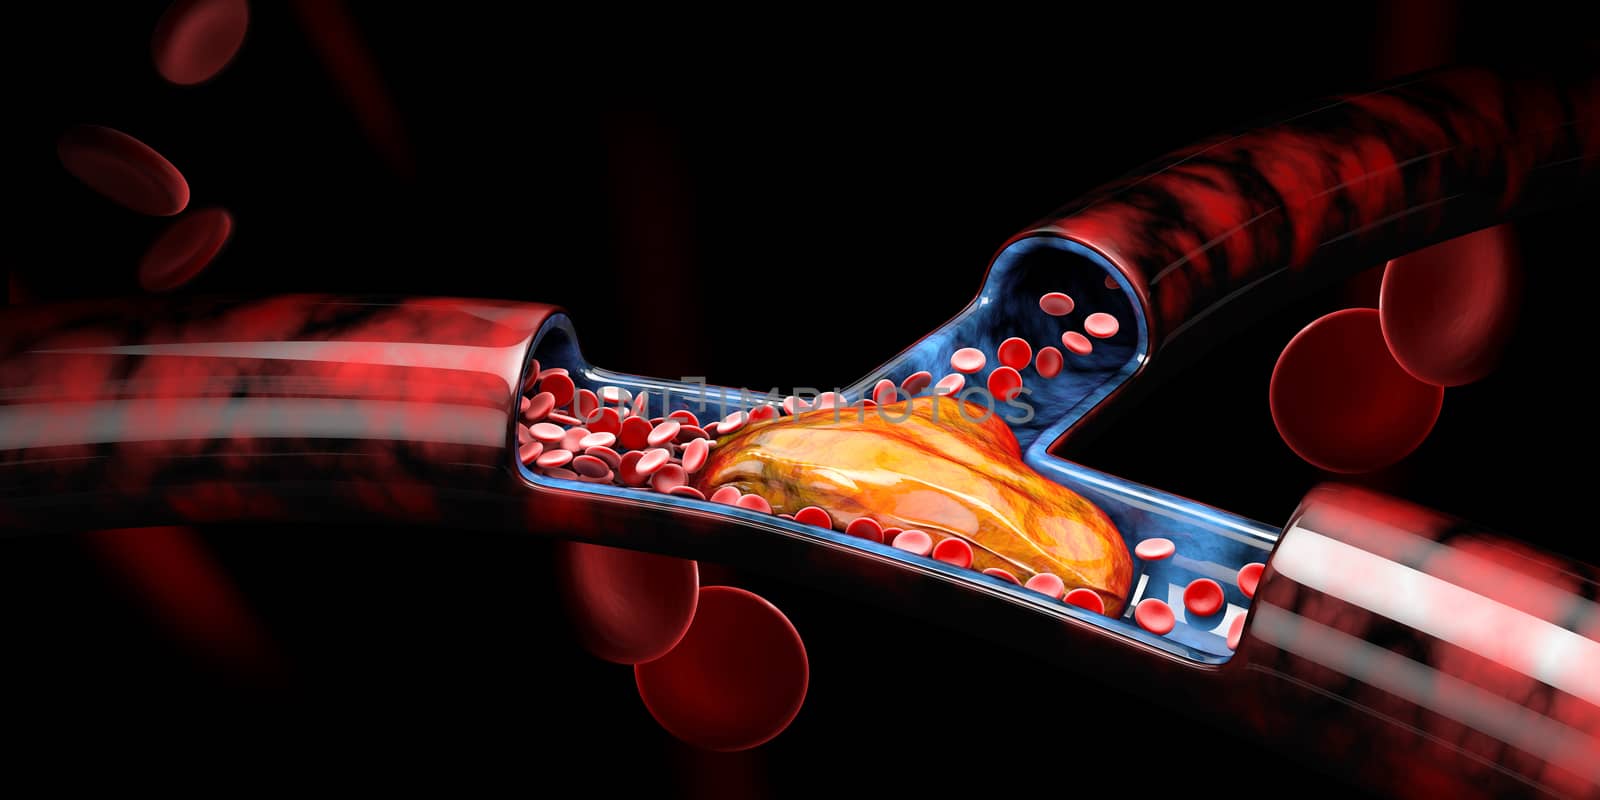 3d Illustration of Deep Vein Thrombosis or Blood Clots, Embolism. by tussik